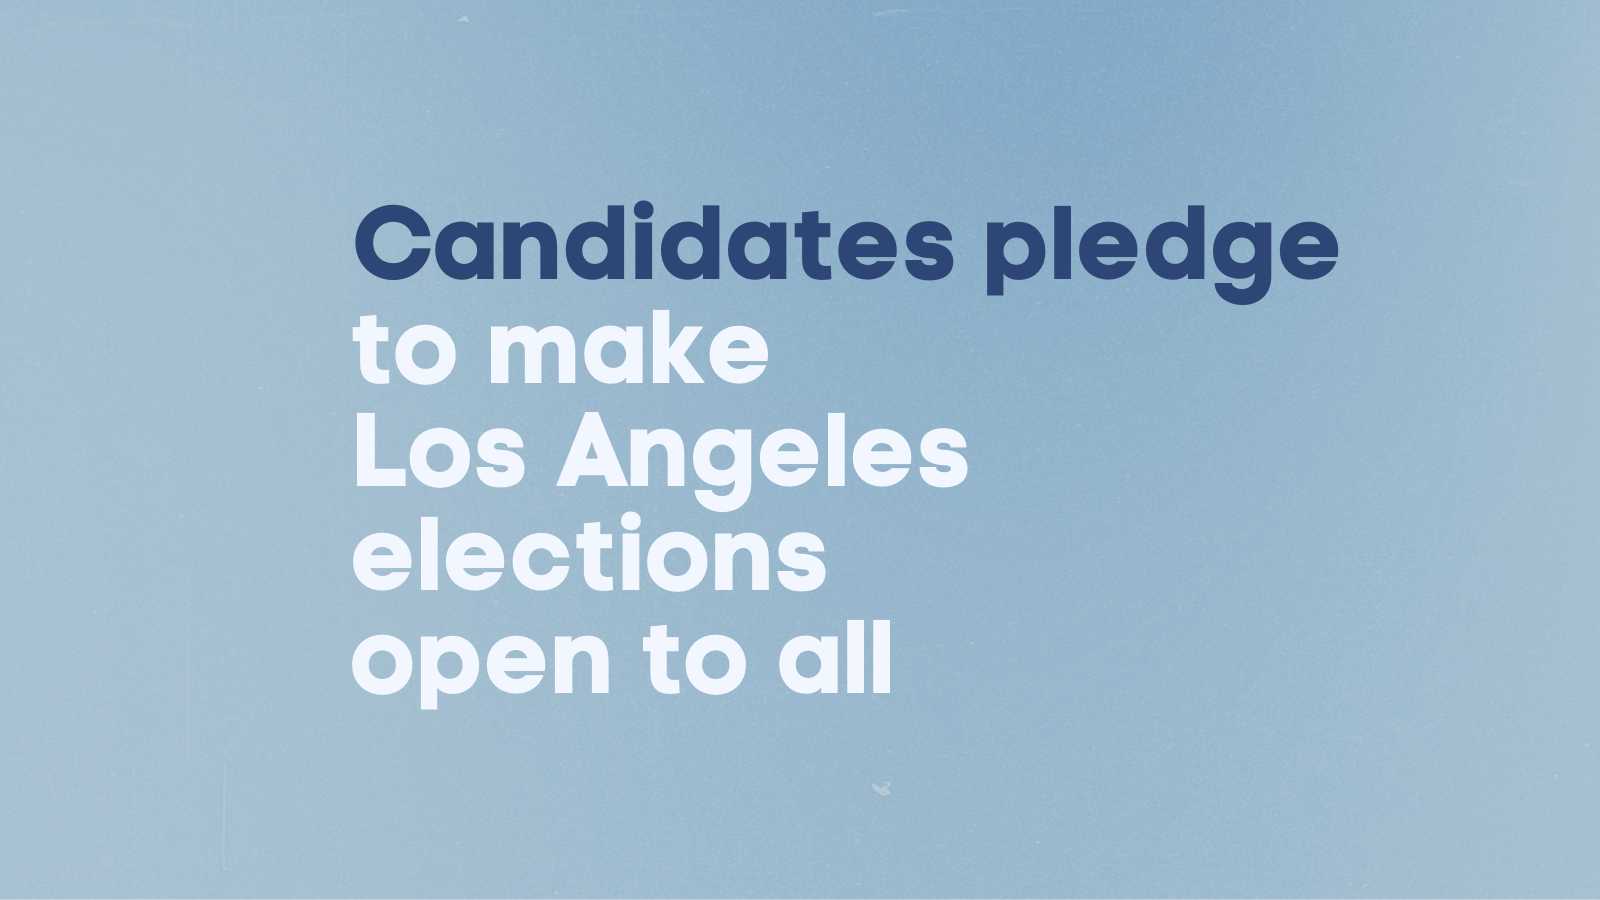 Candidates pledge to support democracy vouchers, if elected